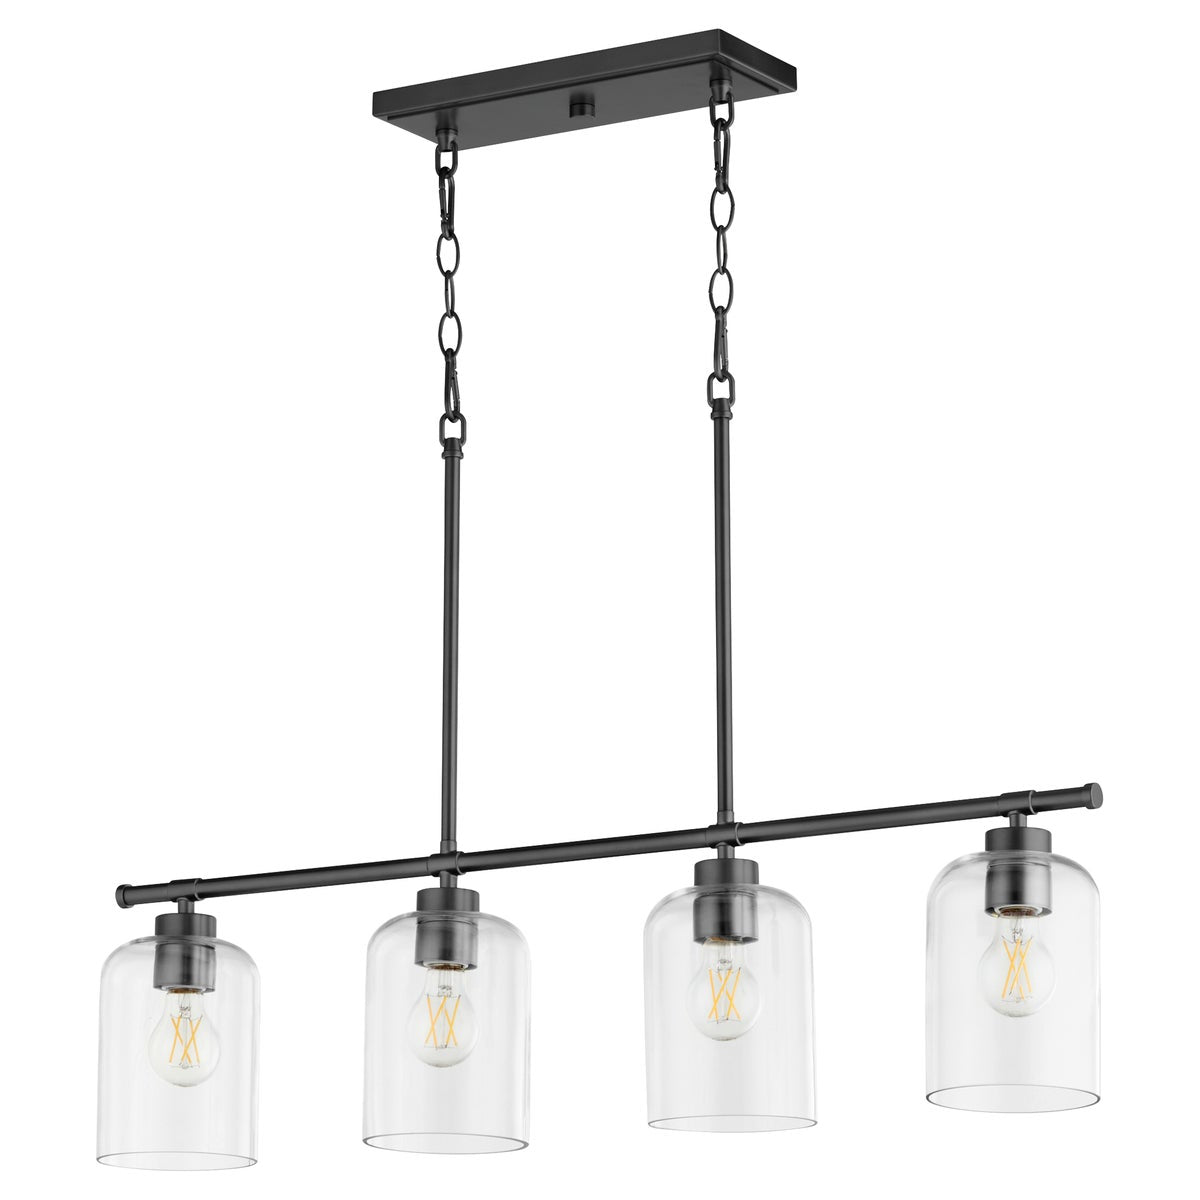 Kitchen Pendant Light with clear glass shades on linear frames. Choose from matte black, aged brass, or satin nickel finishes. Indoor/outdoor use. 100W, 4 bulbs, dimmable. UL Listed, Damp Location. 5"W x 9.5"H x 35"L. 2-year warranty.